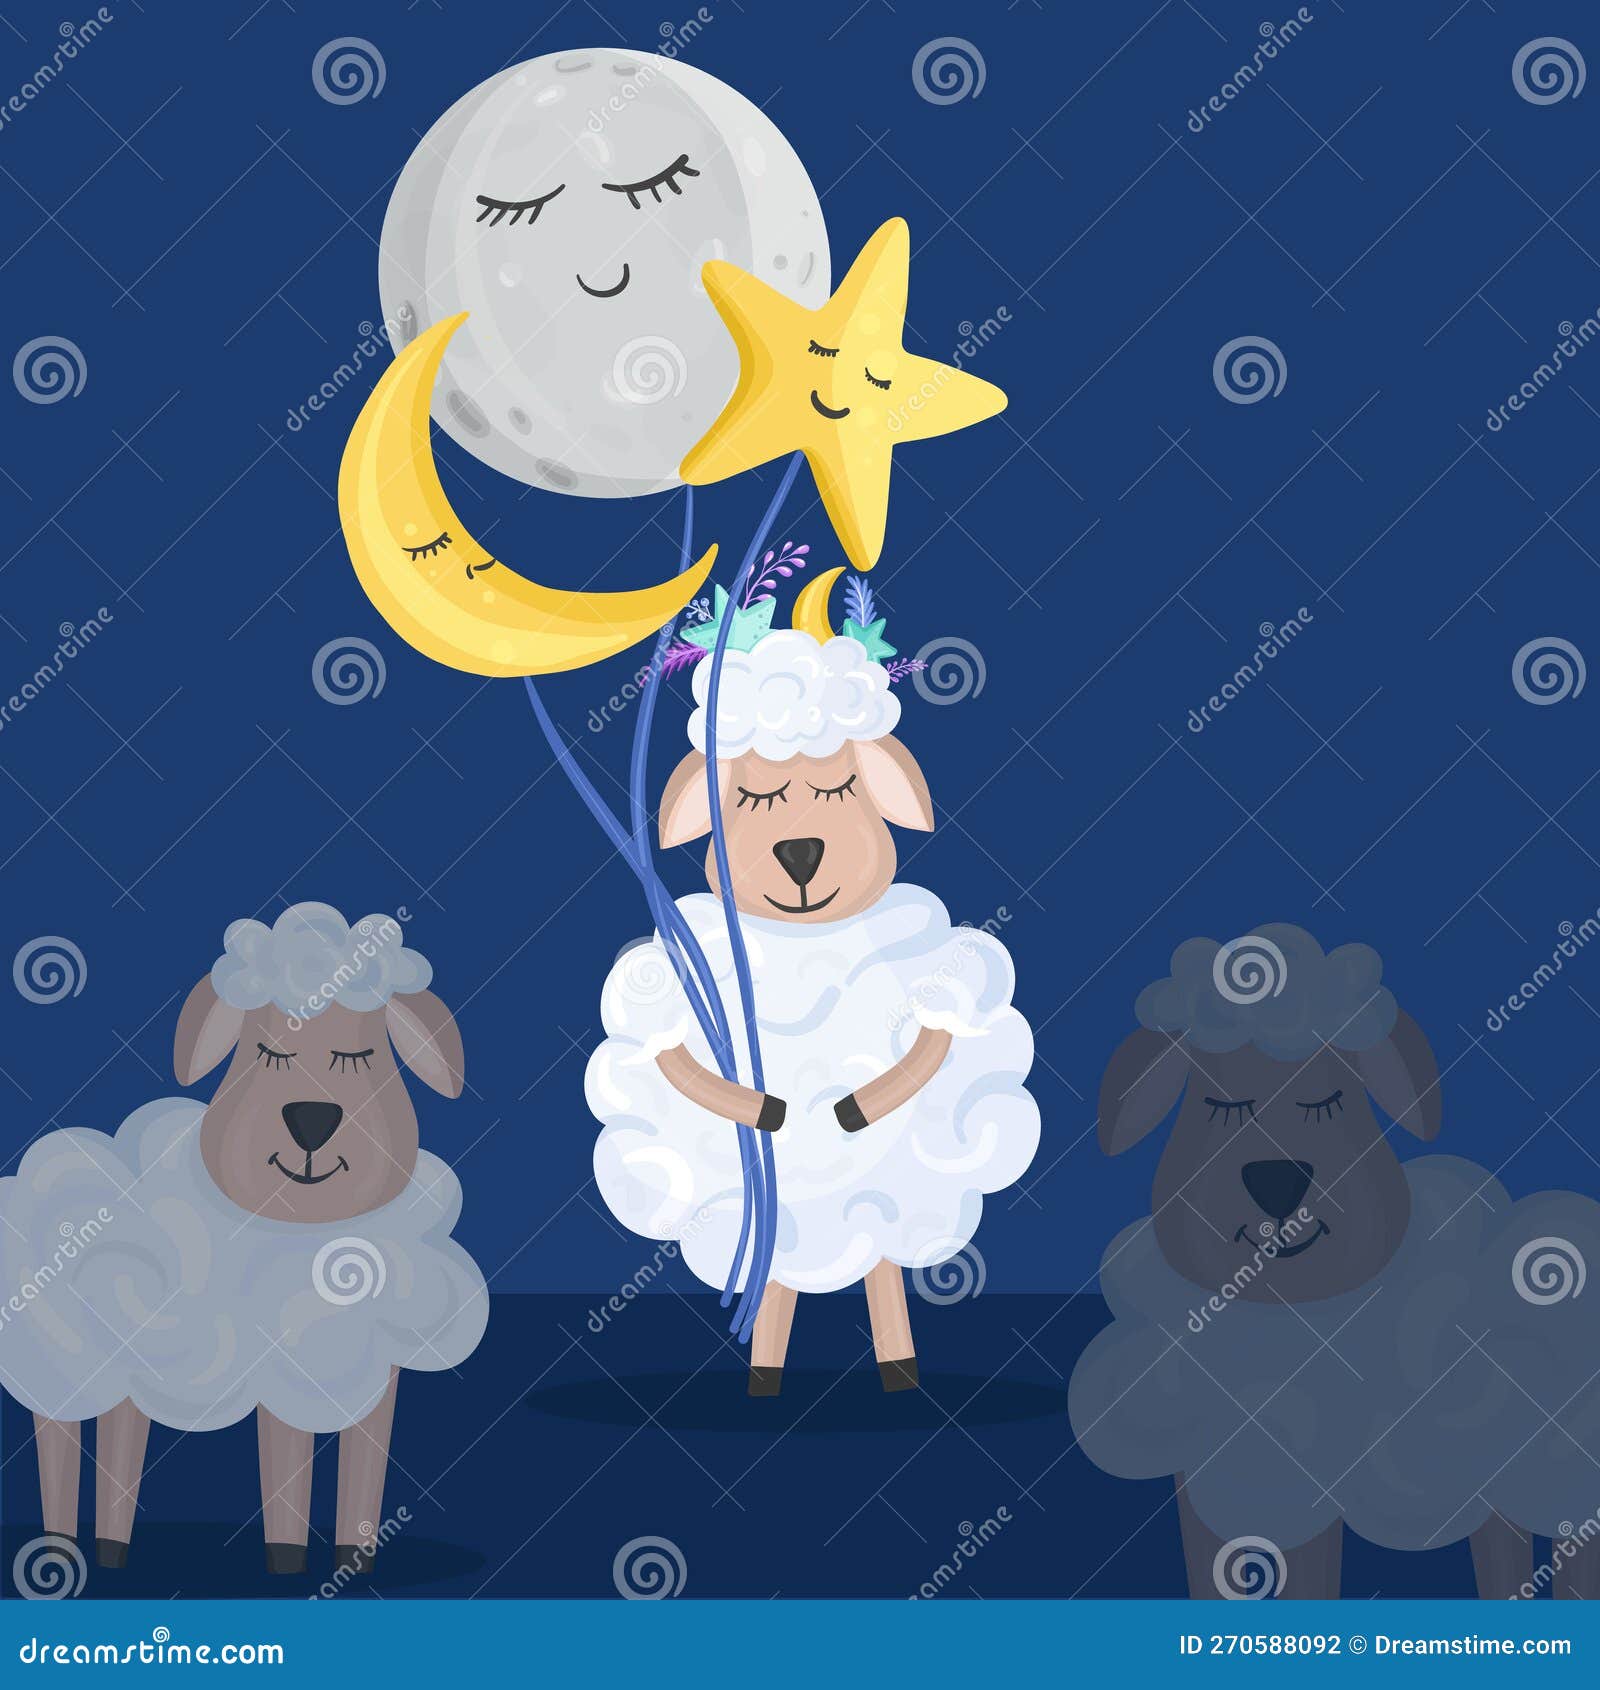 The Cute Sheep is Holding Balloons - Moon and Star in Cartoon Style ...